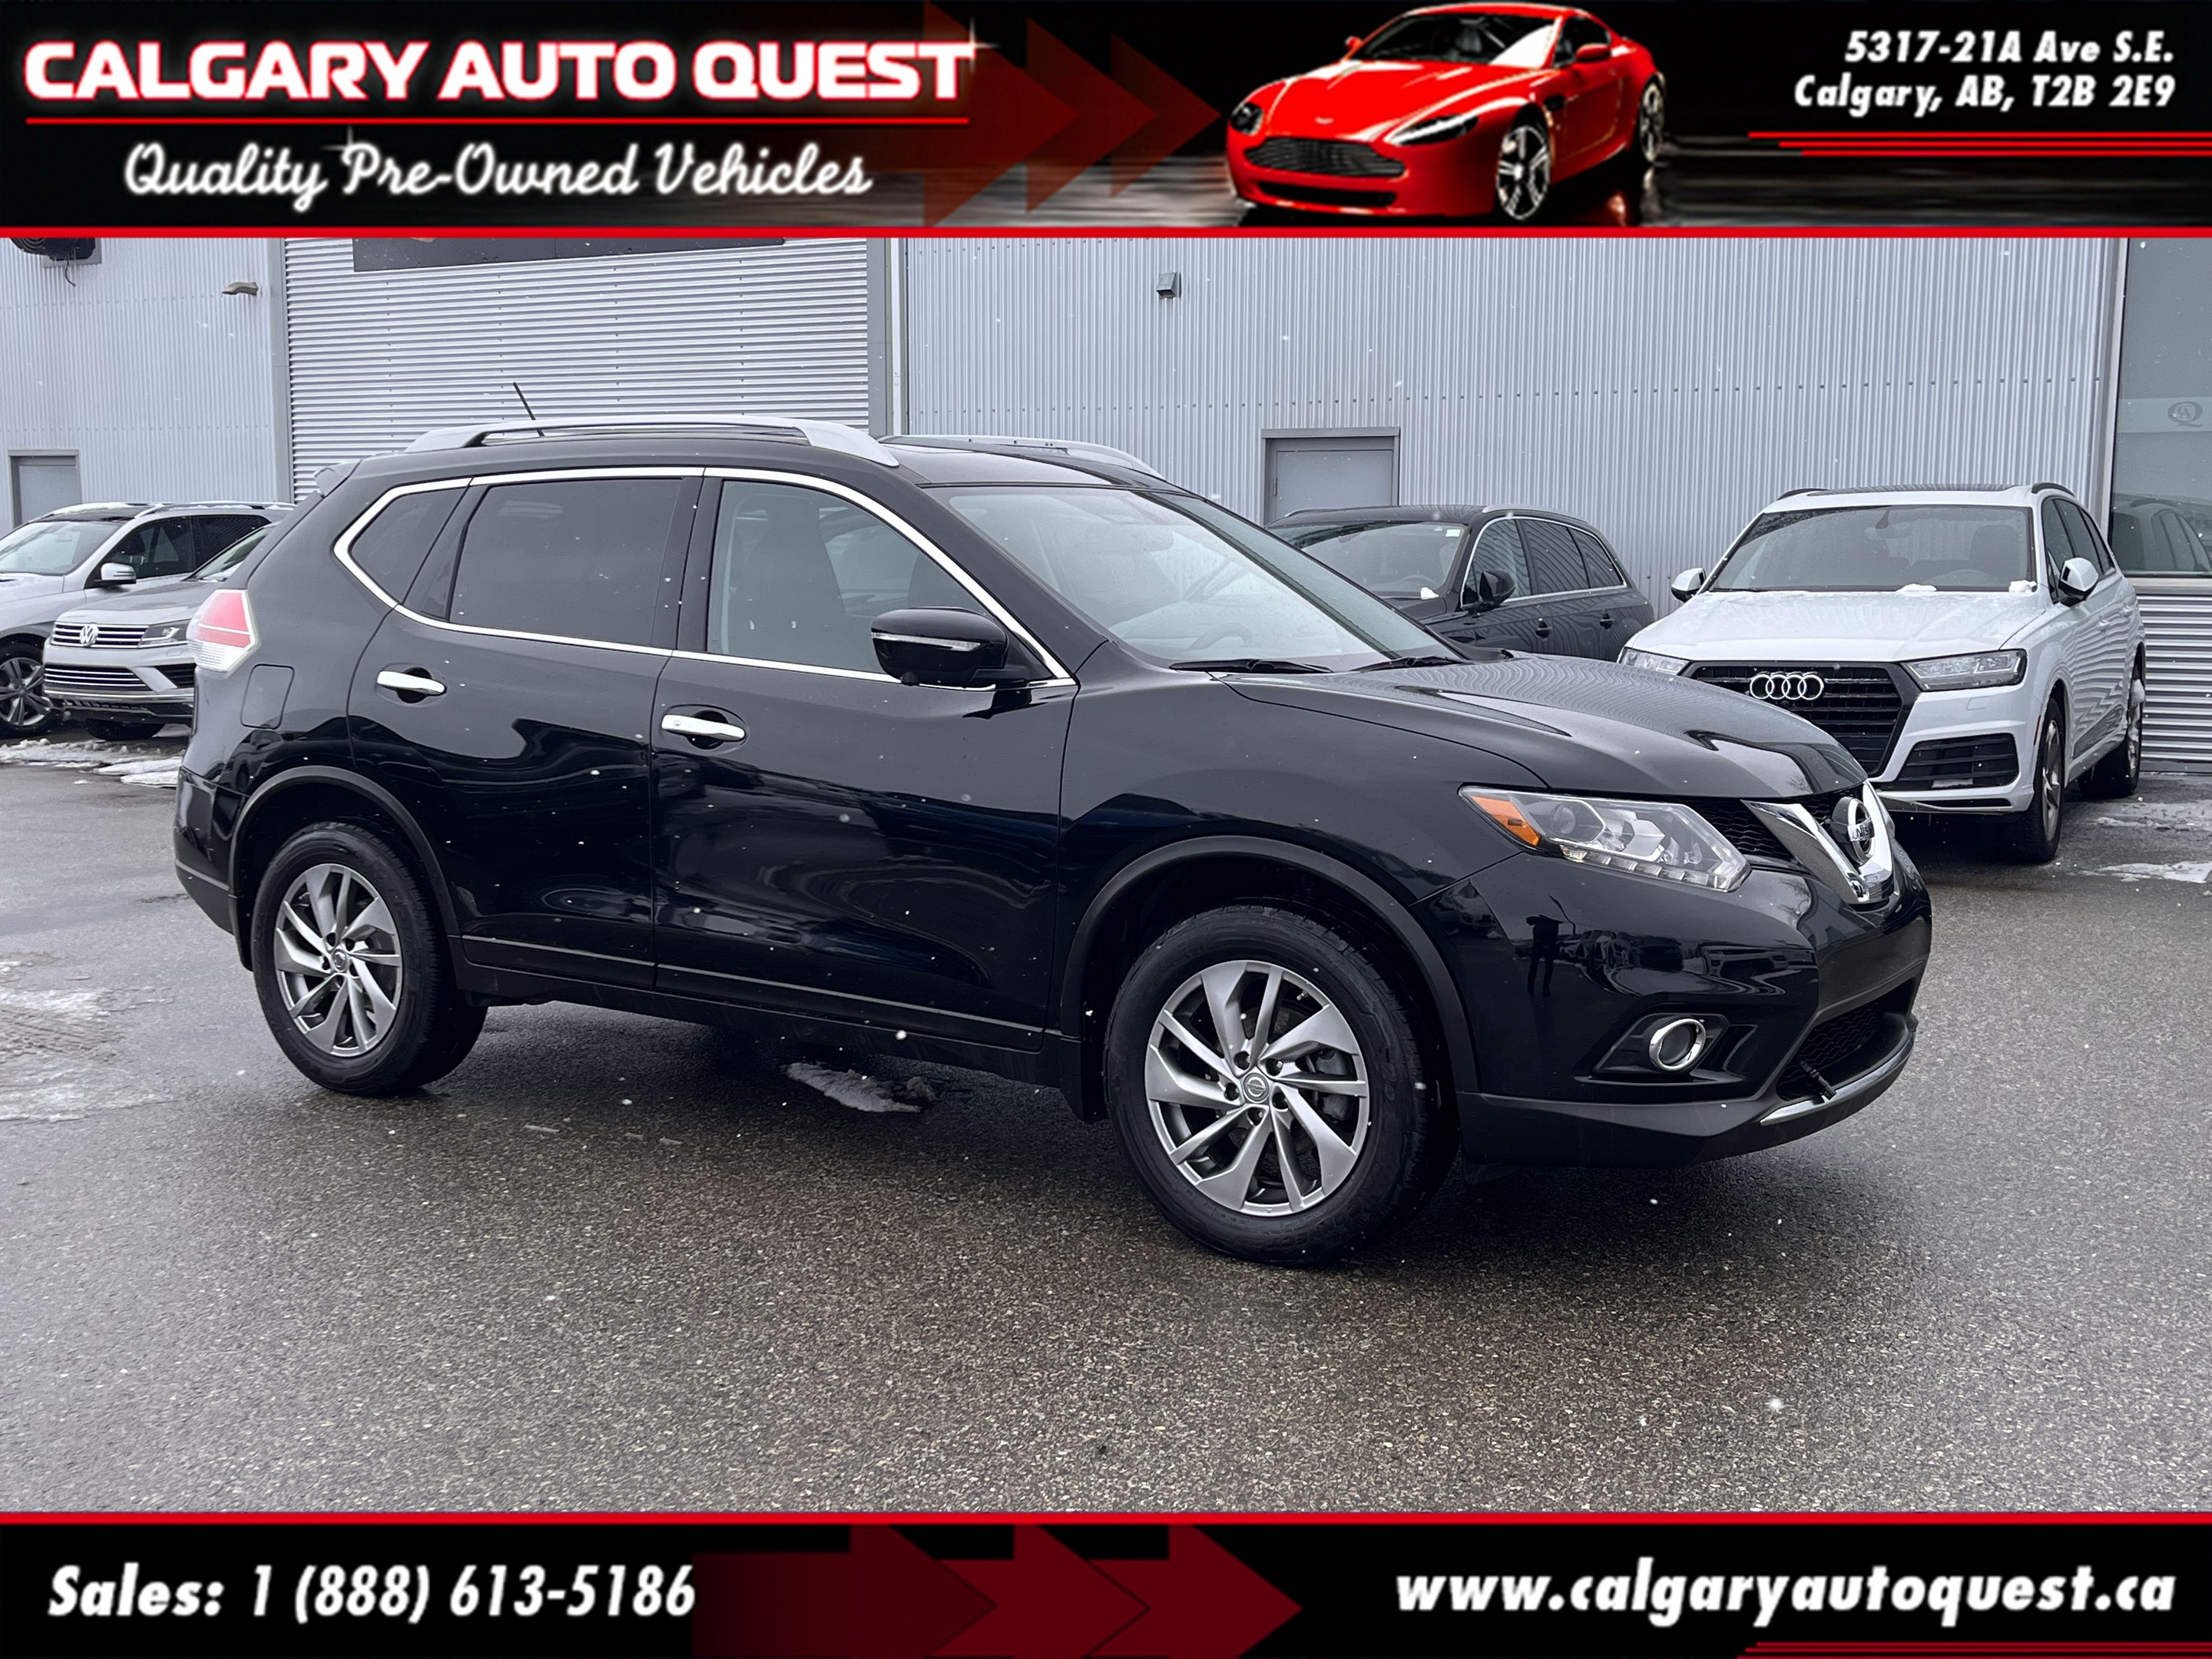 2015 Nissan Rogue AWD 4dr SL NAVI/B.CAM/LEATHER/ROOF